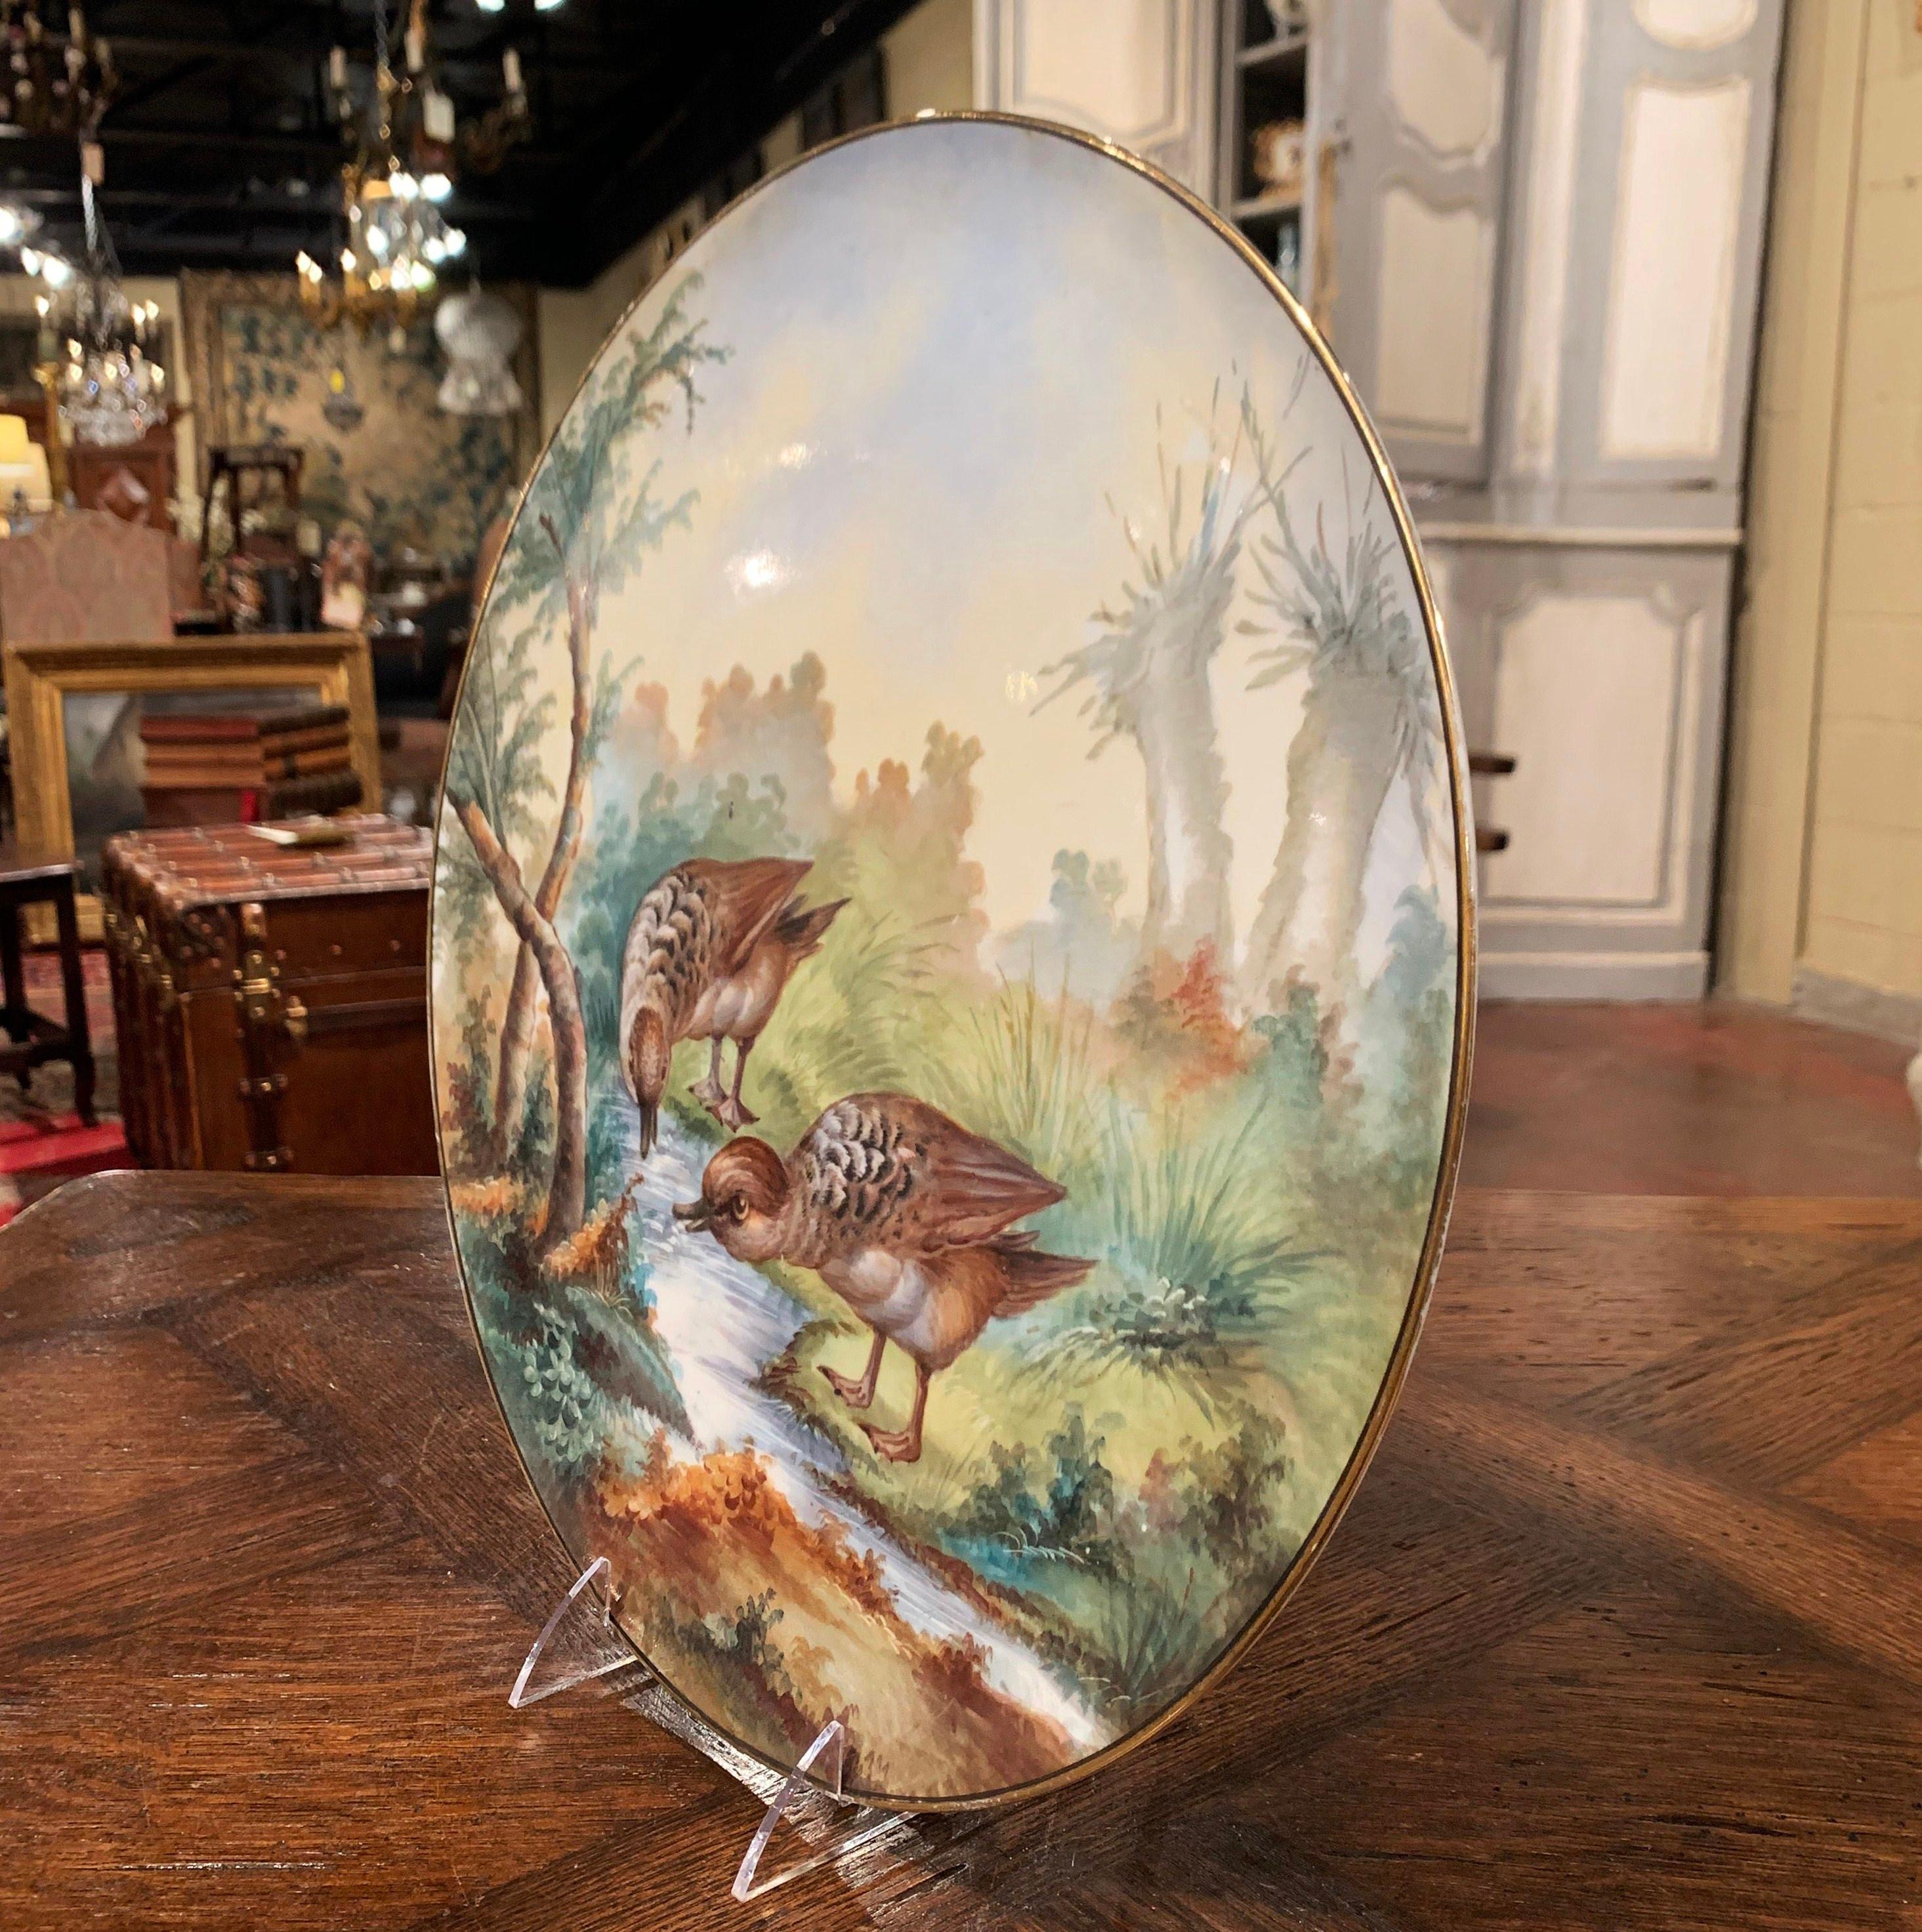 19th Century French Hand Painted Porcelain Bird Platter Signed J. Pouyat In Excellent Condition For Sale In Dallas, TX